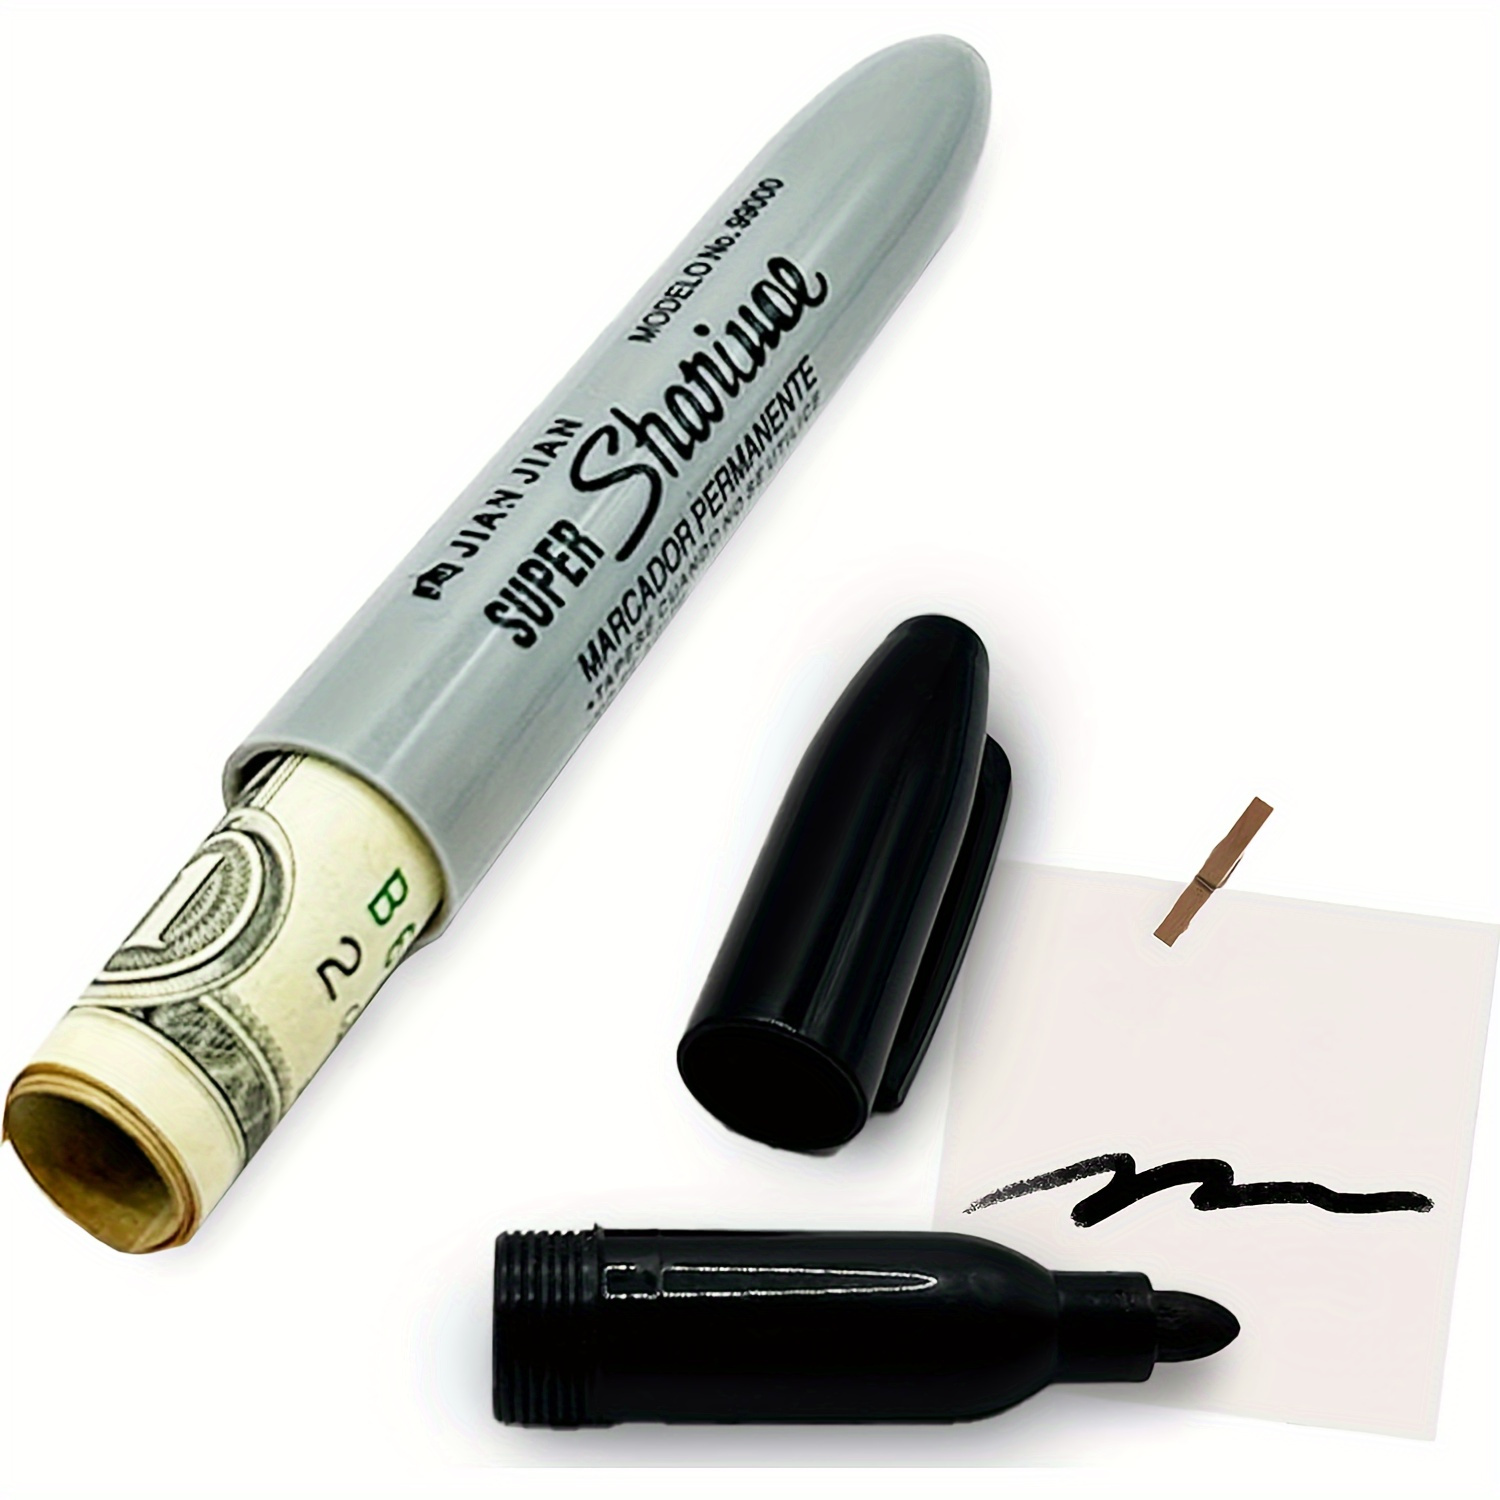 

Diversion Safe Marker Pen - Non-waterproof Plastic Secret Compartment For Money And Small Valuables Storage - Stealth Fake Marker Security Safe